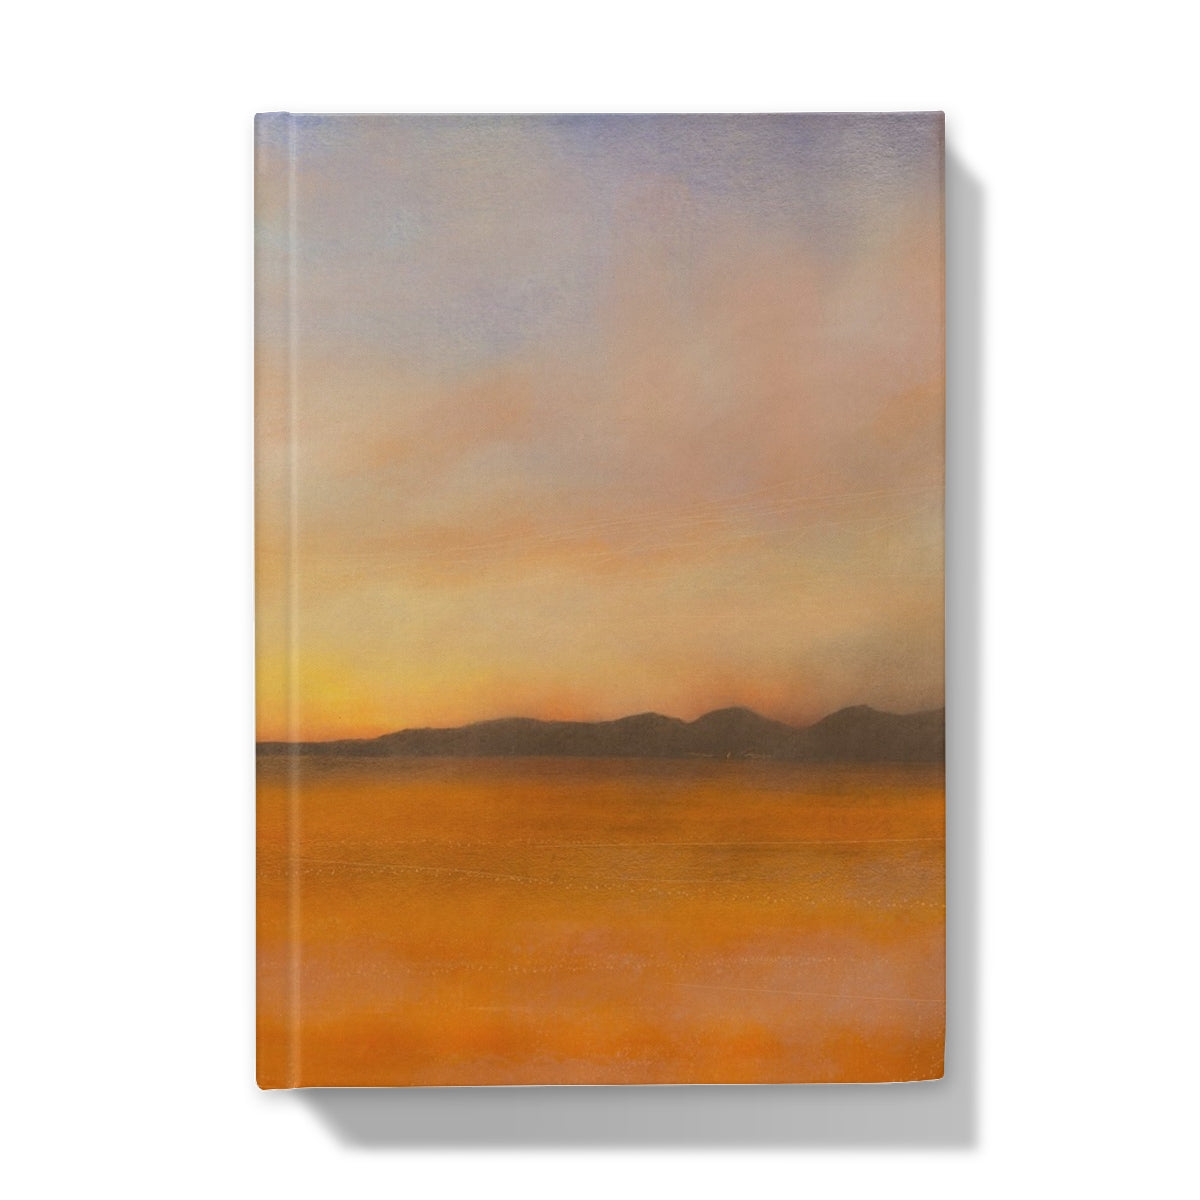 Islay Dawn Art Gifts Hardback Journal-Journals & Notebooks-Hebridean Islands Art Gallery-A4-Lined-Paintings, Prints, Homeware, Art Gifts From Scotland By Scottish Artist Kevin Hunter